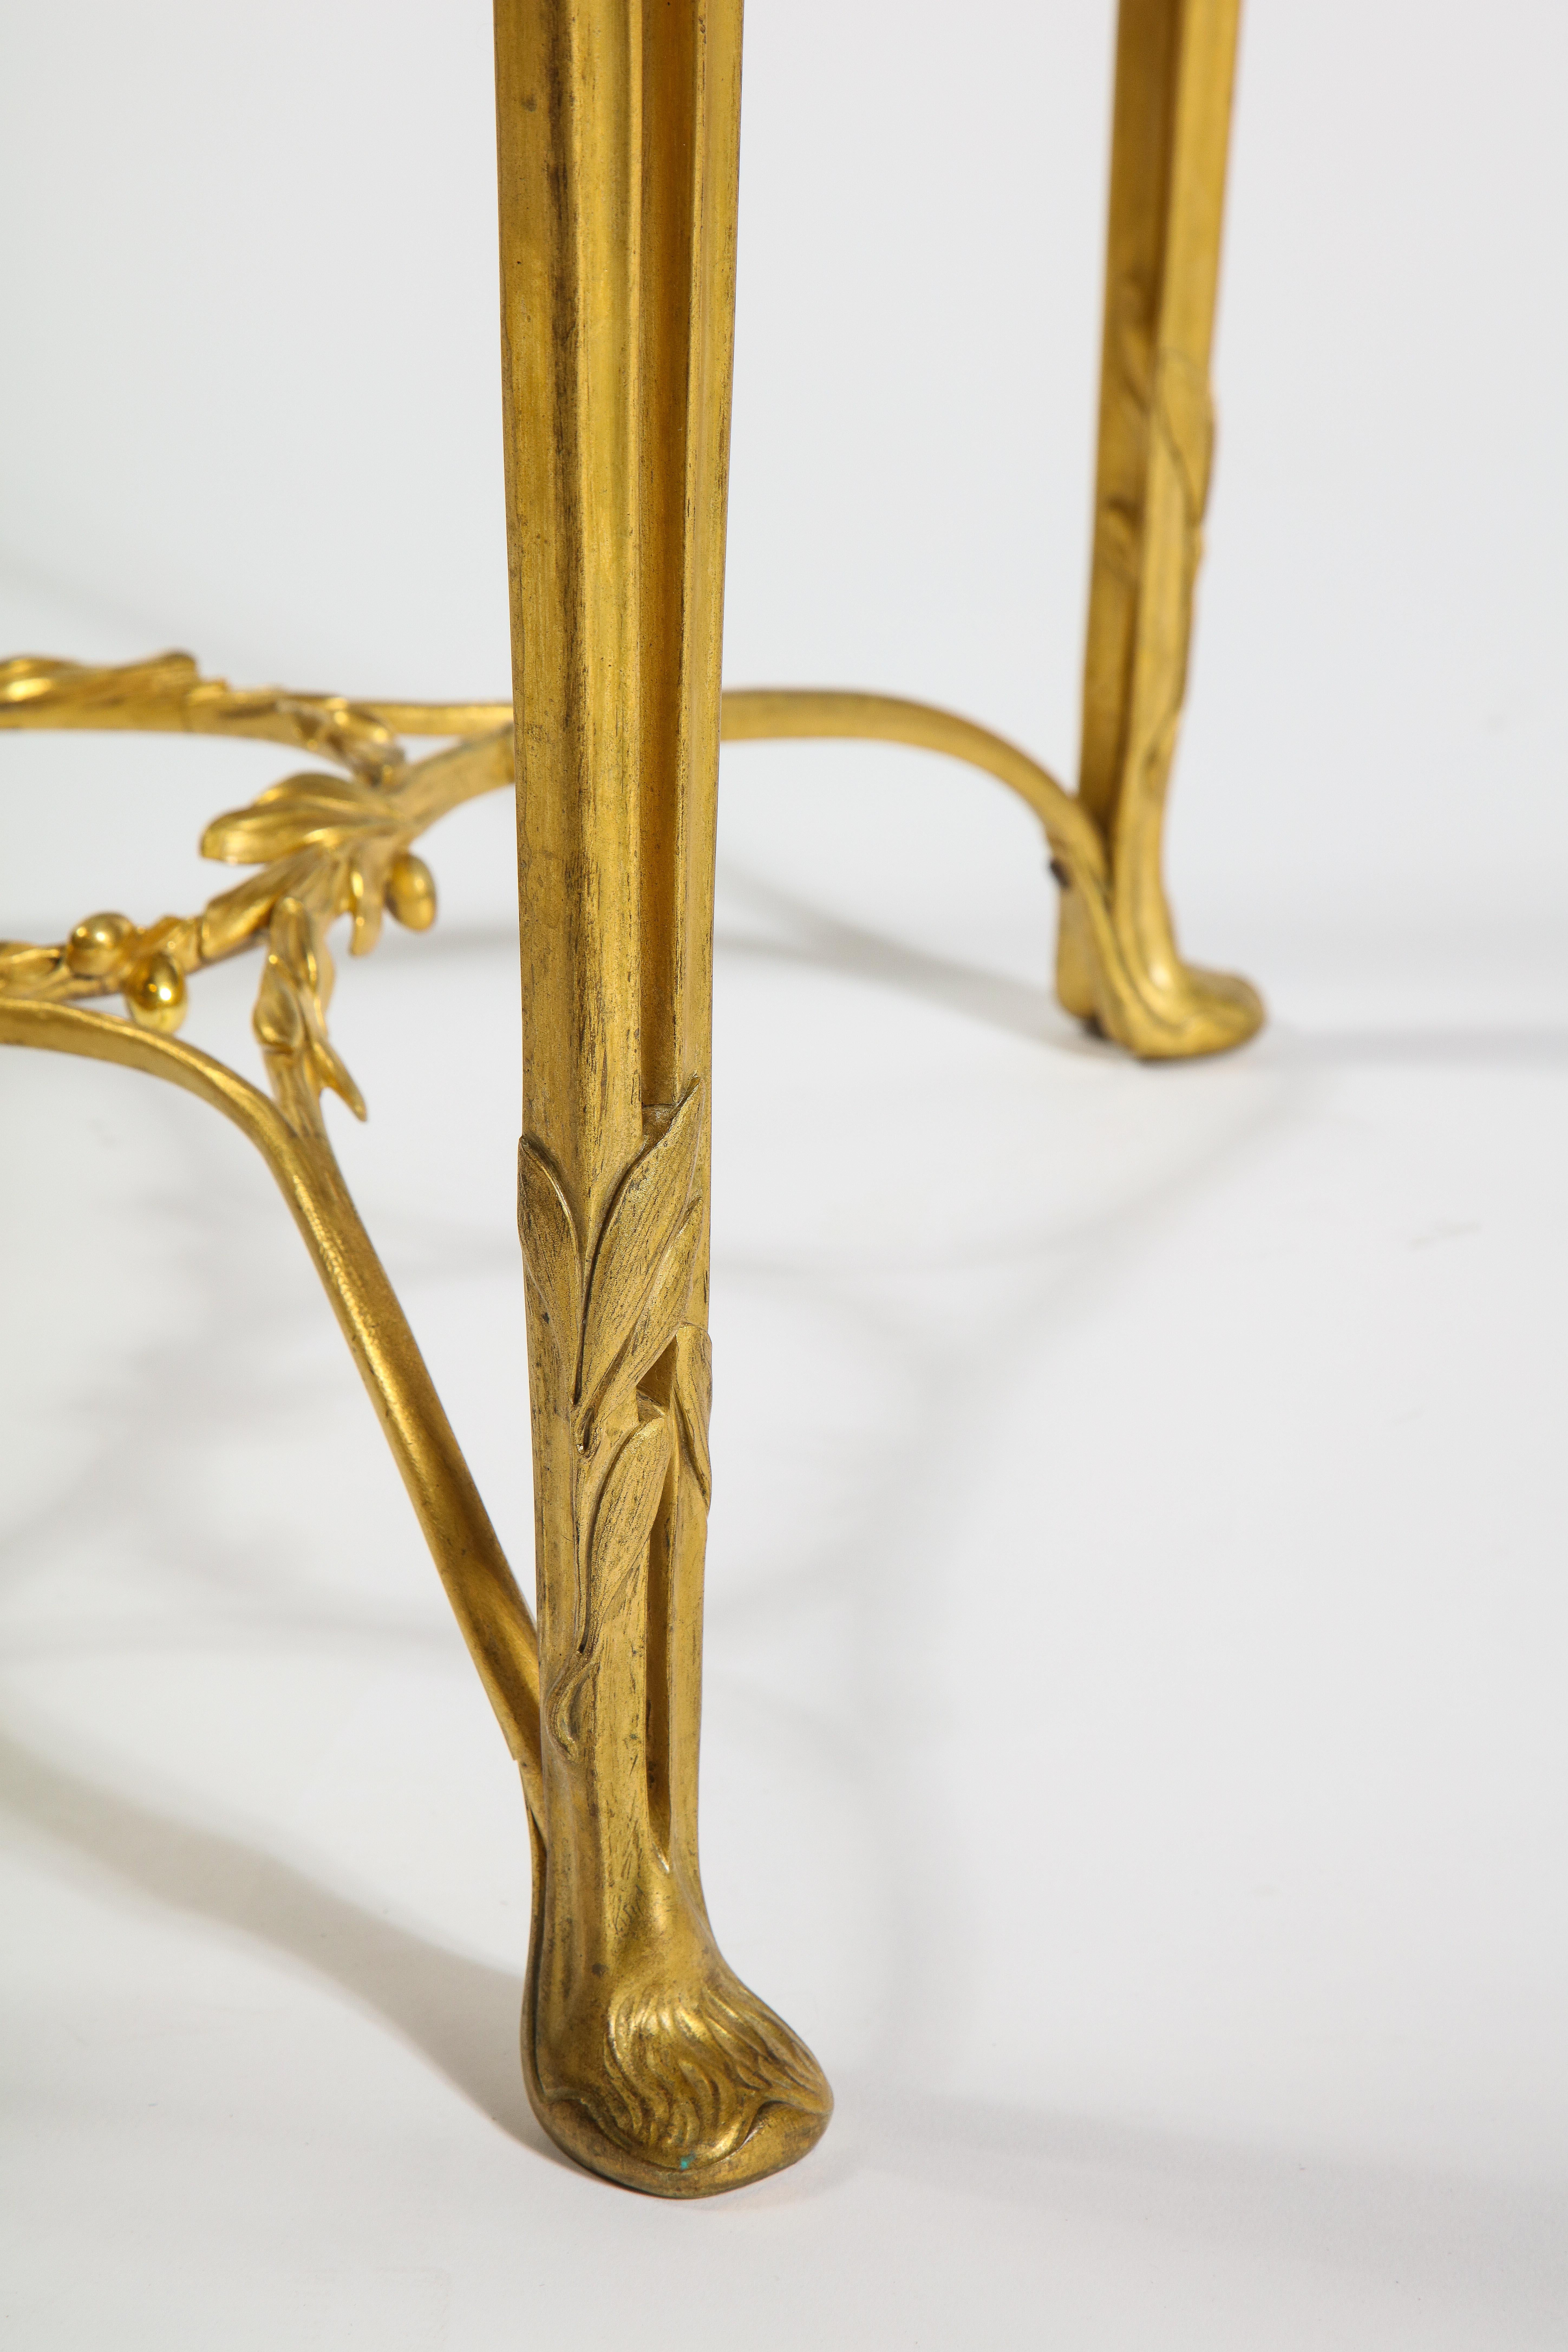 Center Table by Tiffany and Co., Dore Bronze and Marble Top, Signed, Early 1900s For Sale 5